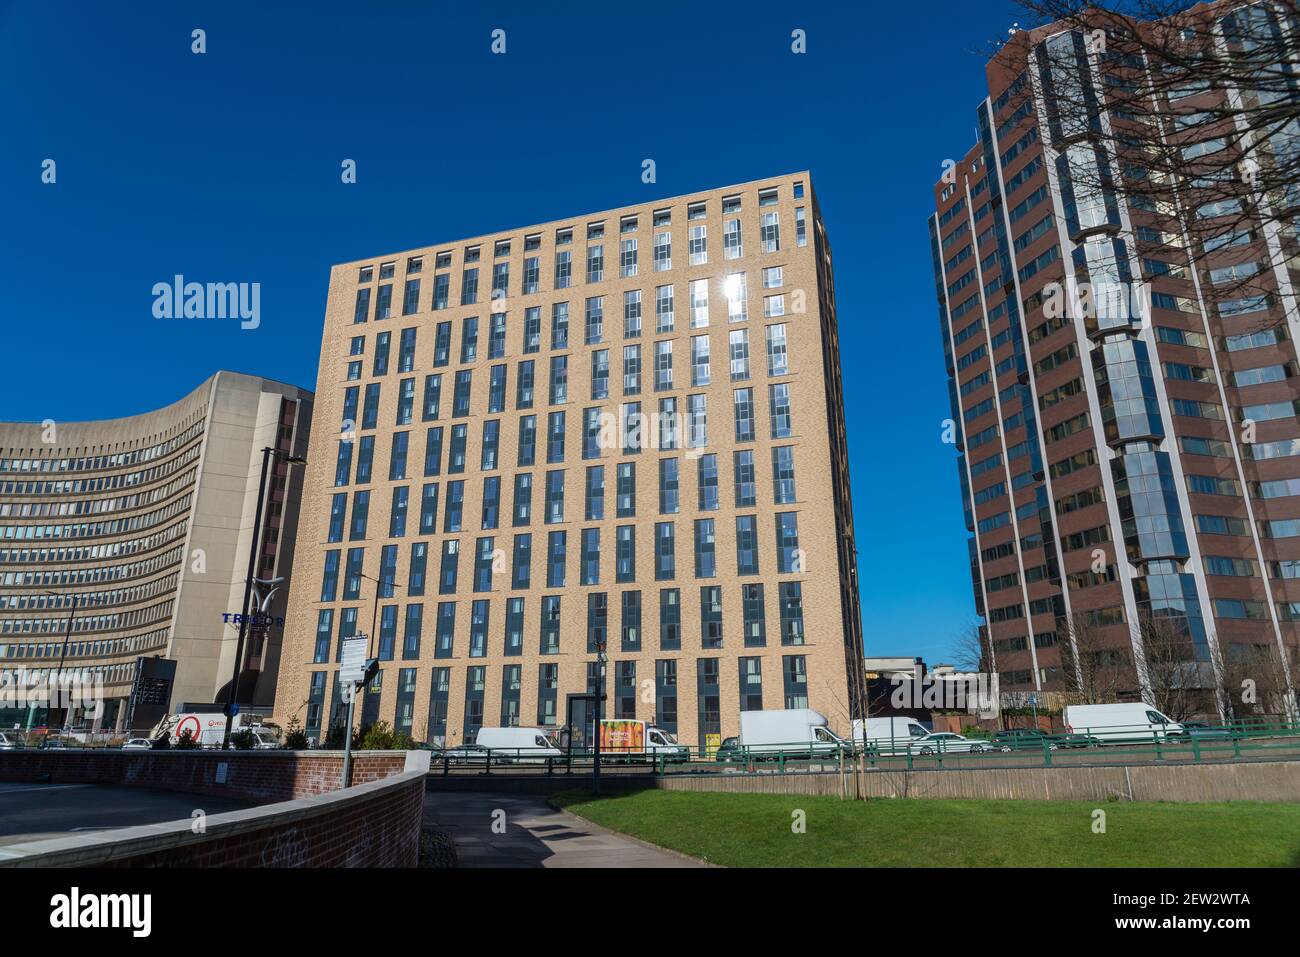 Modern high-rise buildings on the Hagley Road, Edgbaston, Birmingham which are apartments Stock Photo